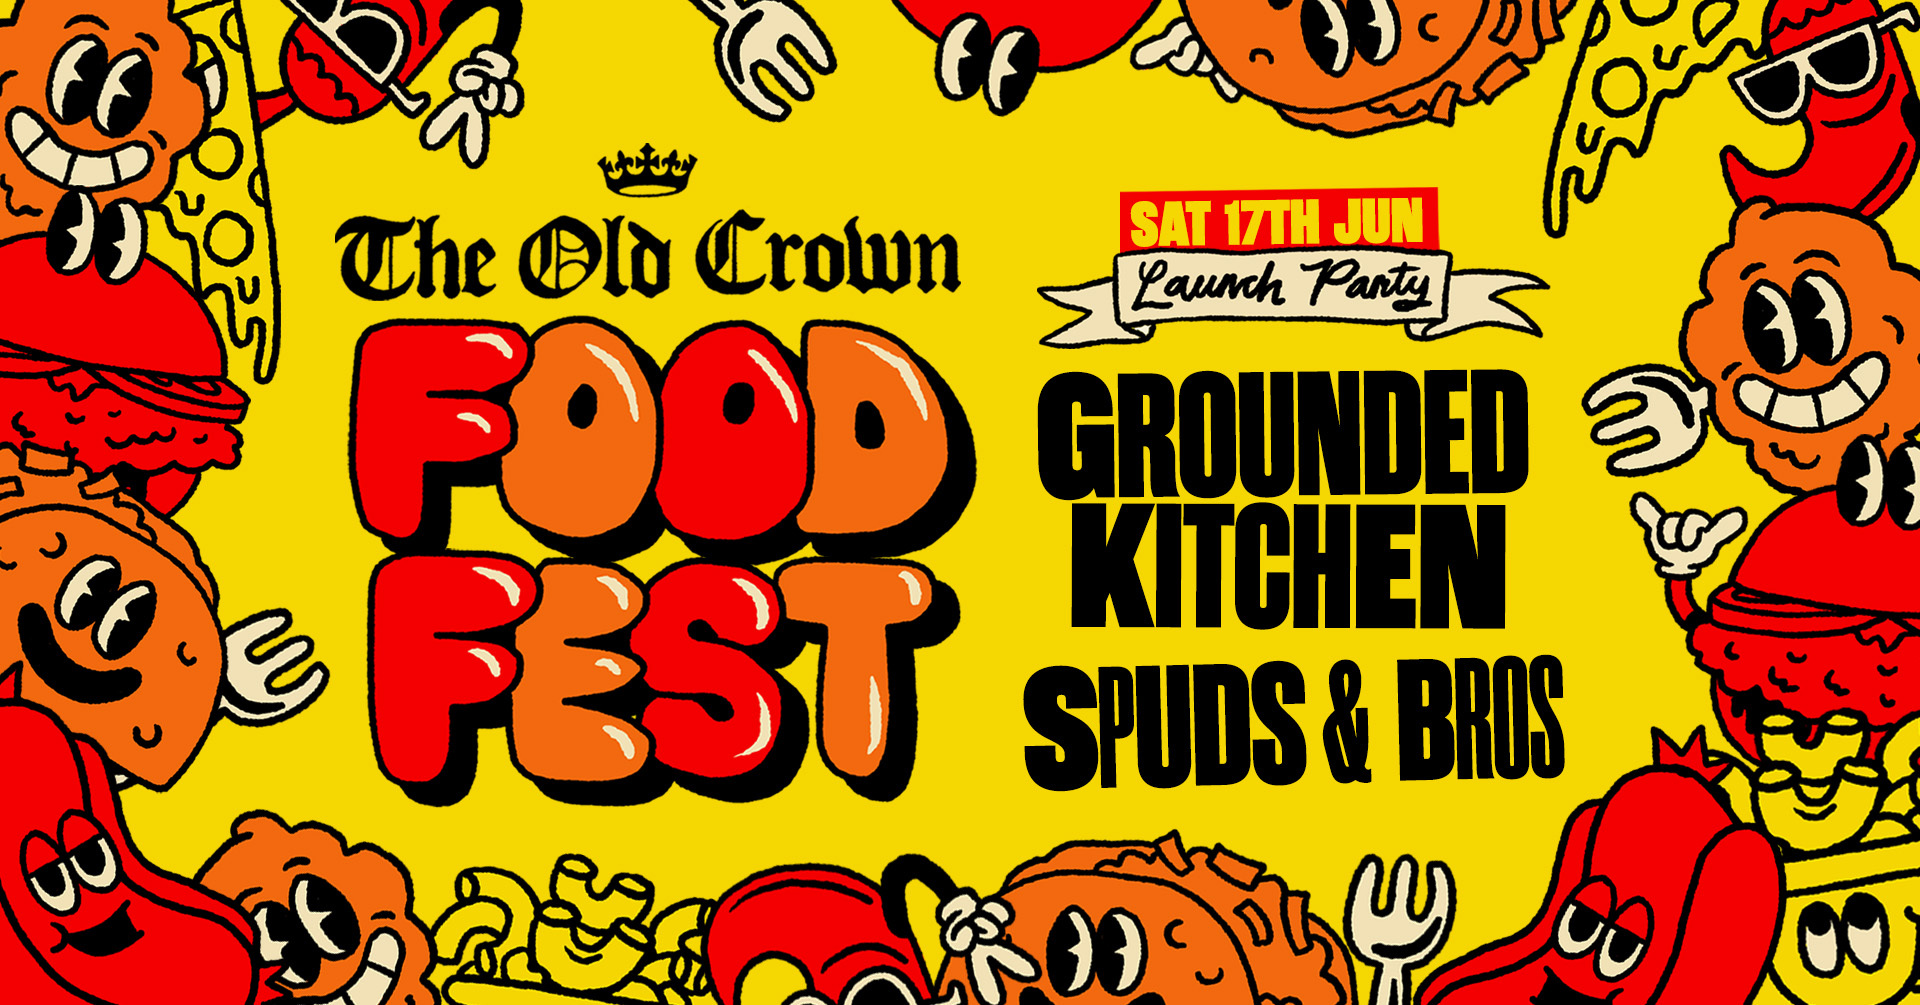 Our Street Food Summer Party Launches on Saturday 17th June!